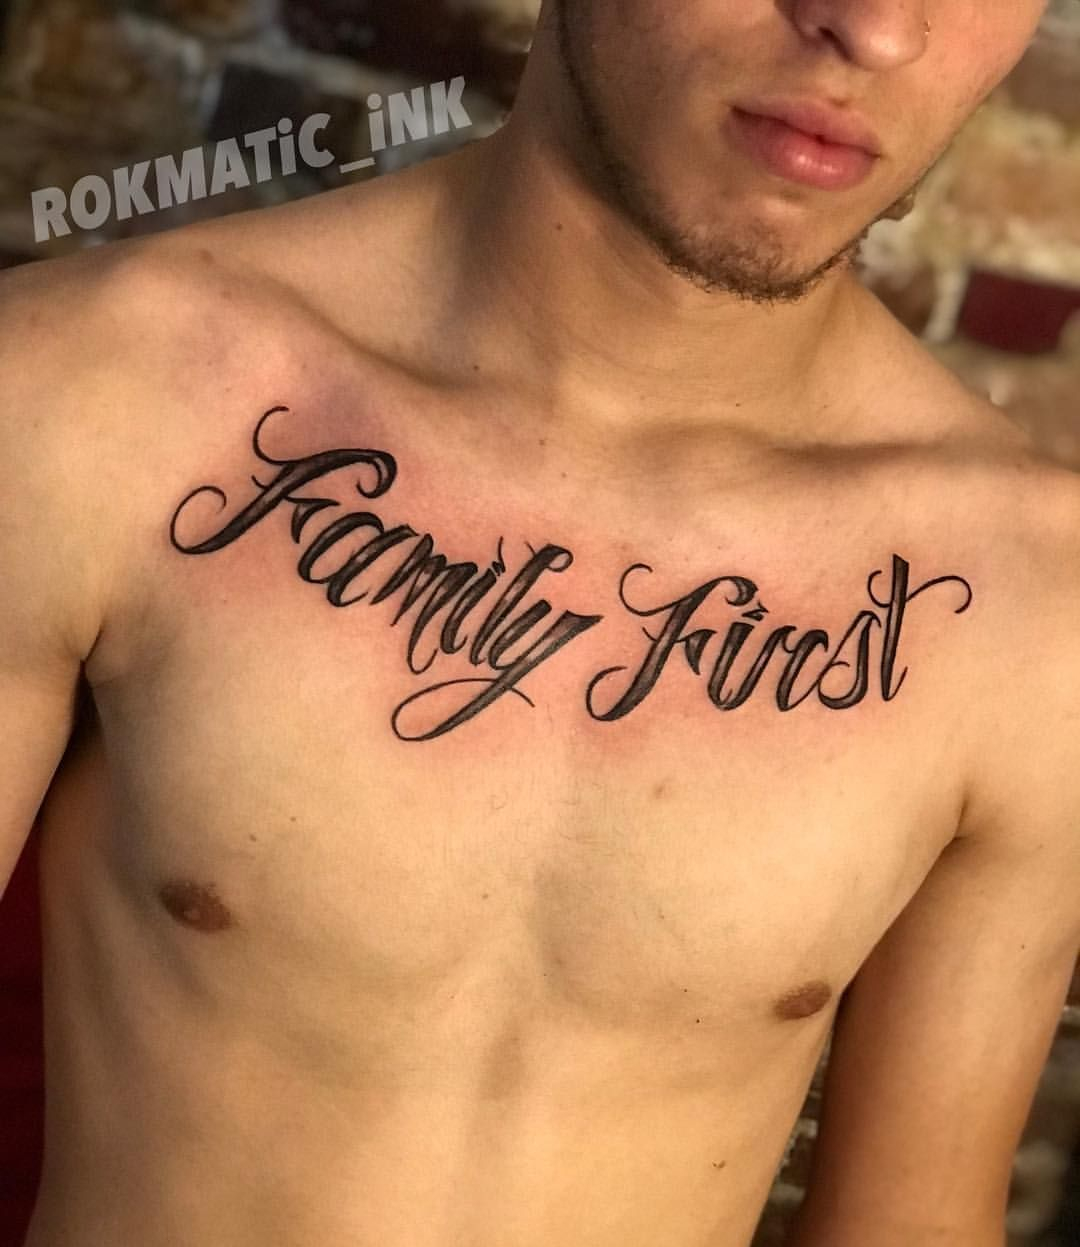 Family First Always Rokmatic Ink Tattoo Thetattplug throughout dimensions 1080 X 1247